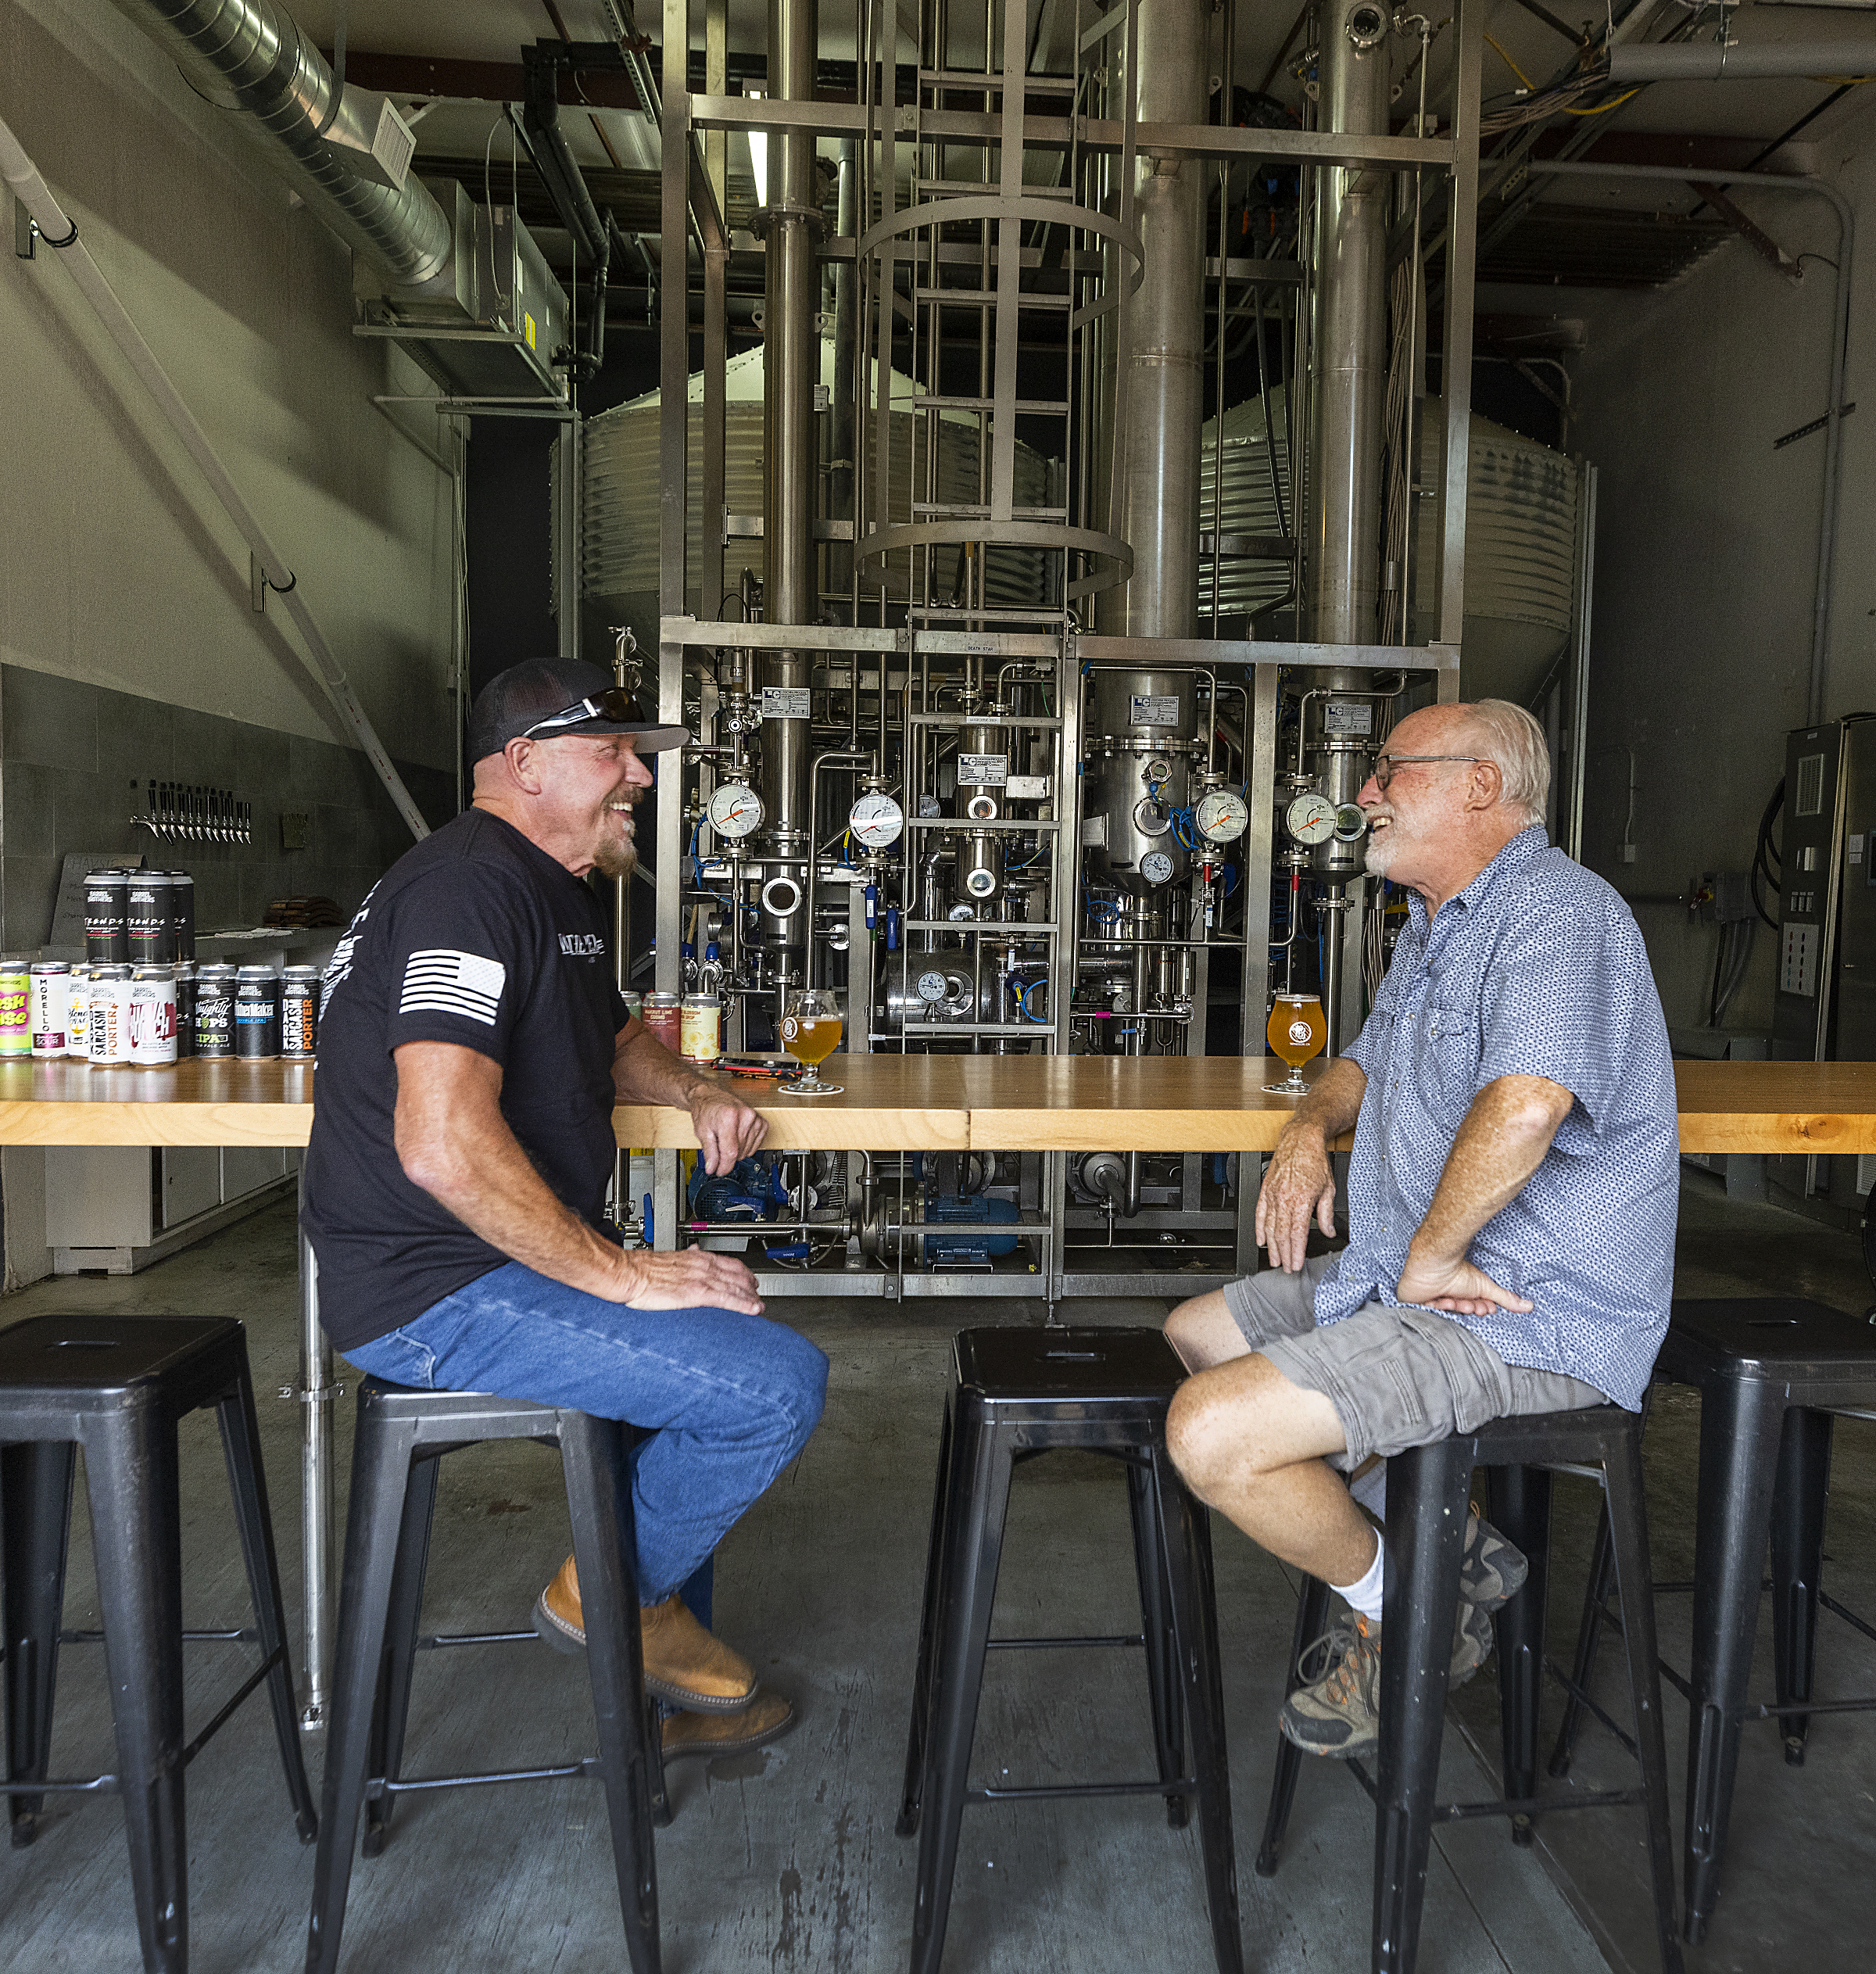 Regulars Gary Covey, left, and Andy Adams talk over a beer at Barrel Brothers Brewing Co. in Windsor on Wednesday, September 15, 2021. (Photo by John Burgess/The Press Democrat)